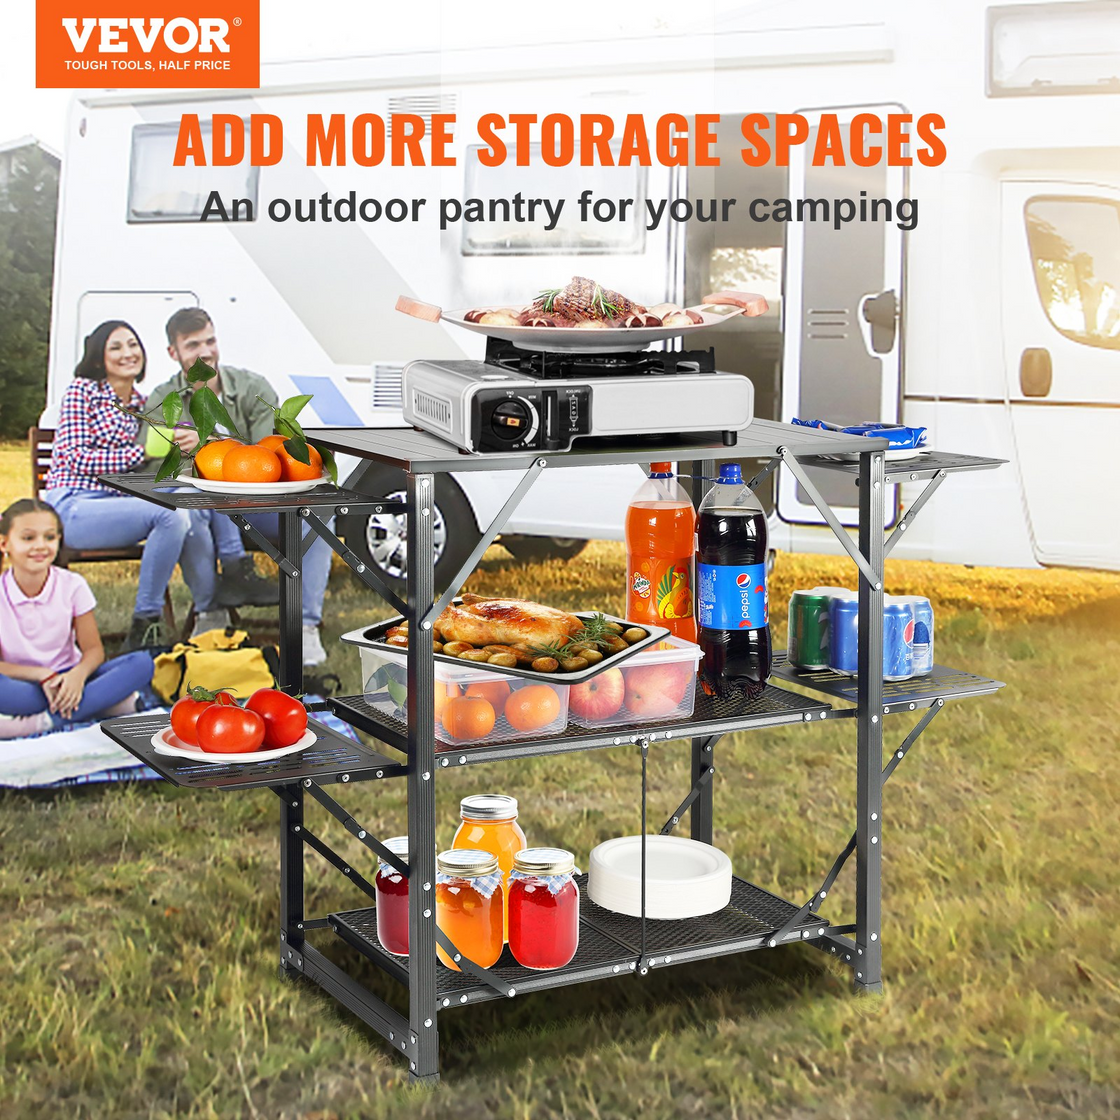 VEVOR Camping Kitchen Table - Folding Portable Cook Station with Carrying Bag